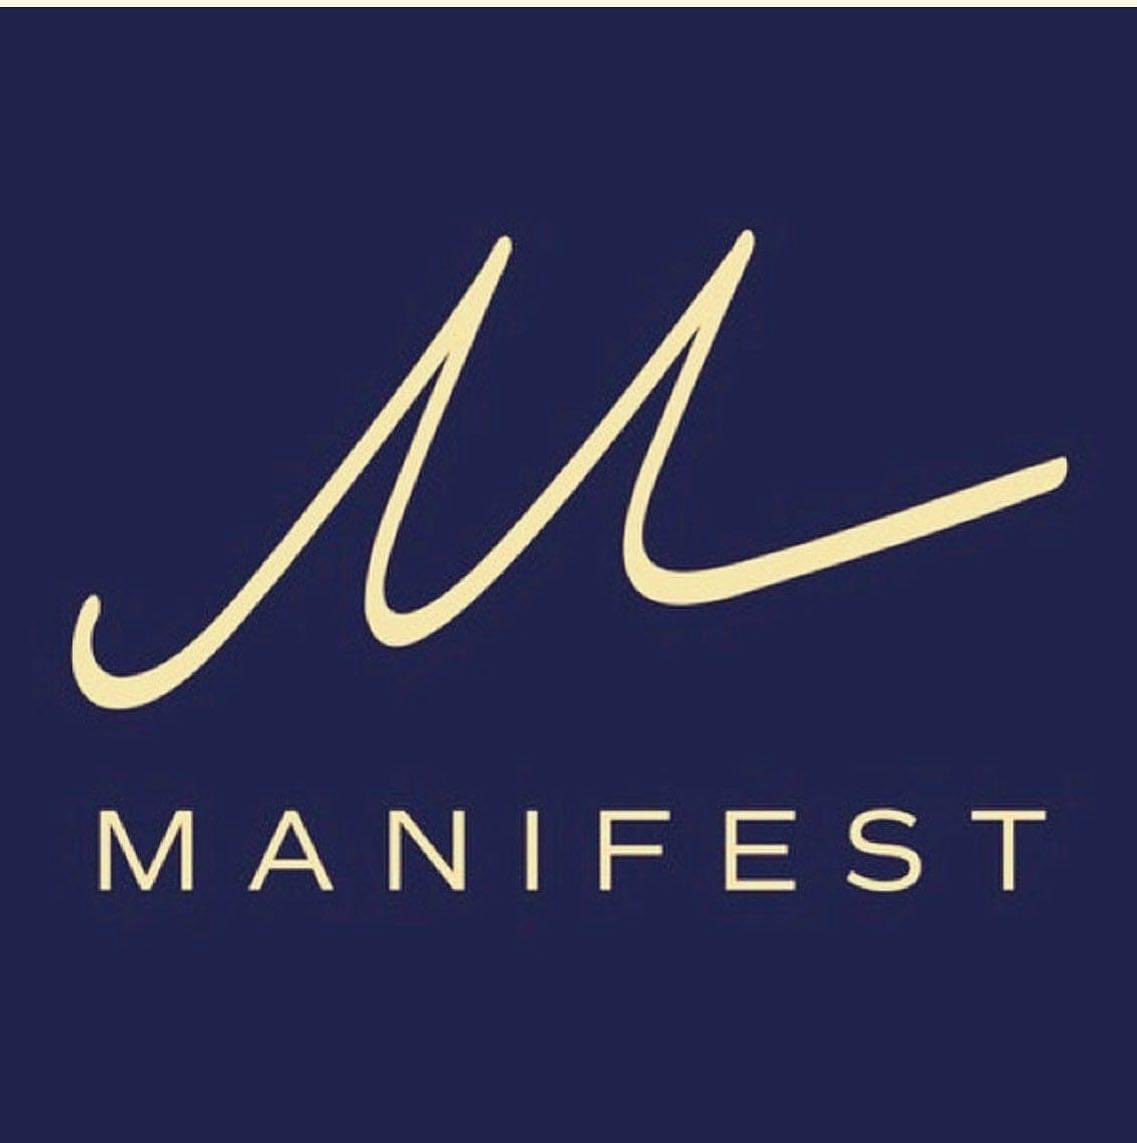 Its been an absolute pleasure to have had the opportunity to help open Liverpool's newest restaurant @manifestliverpool. I'm so pleased i was able to contribute to the successful launch and i'm certain this place will become one of the city's iconic venues in years to come.